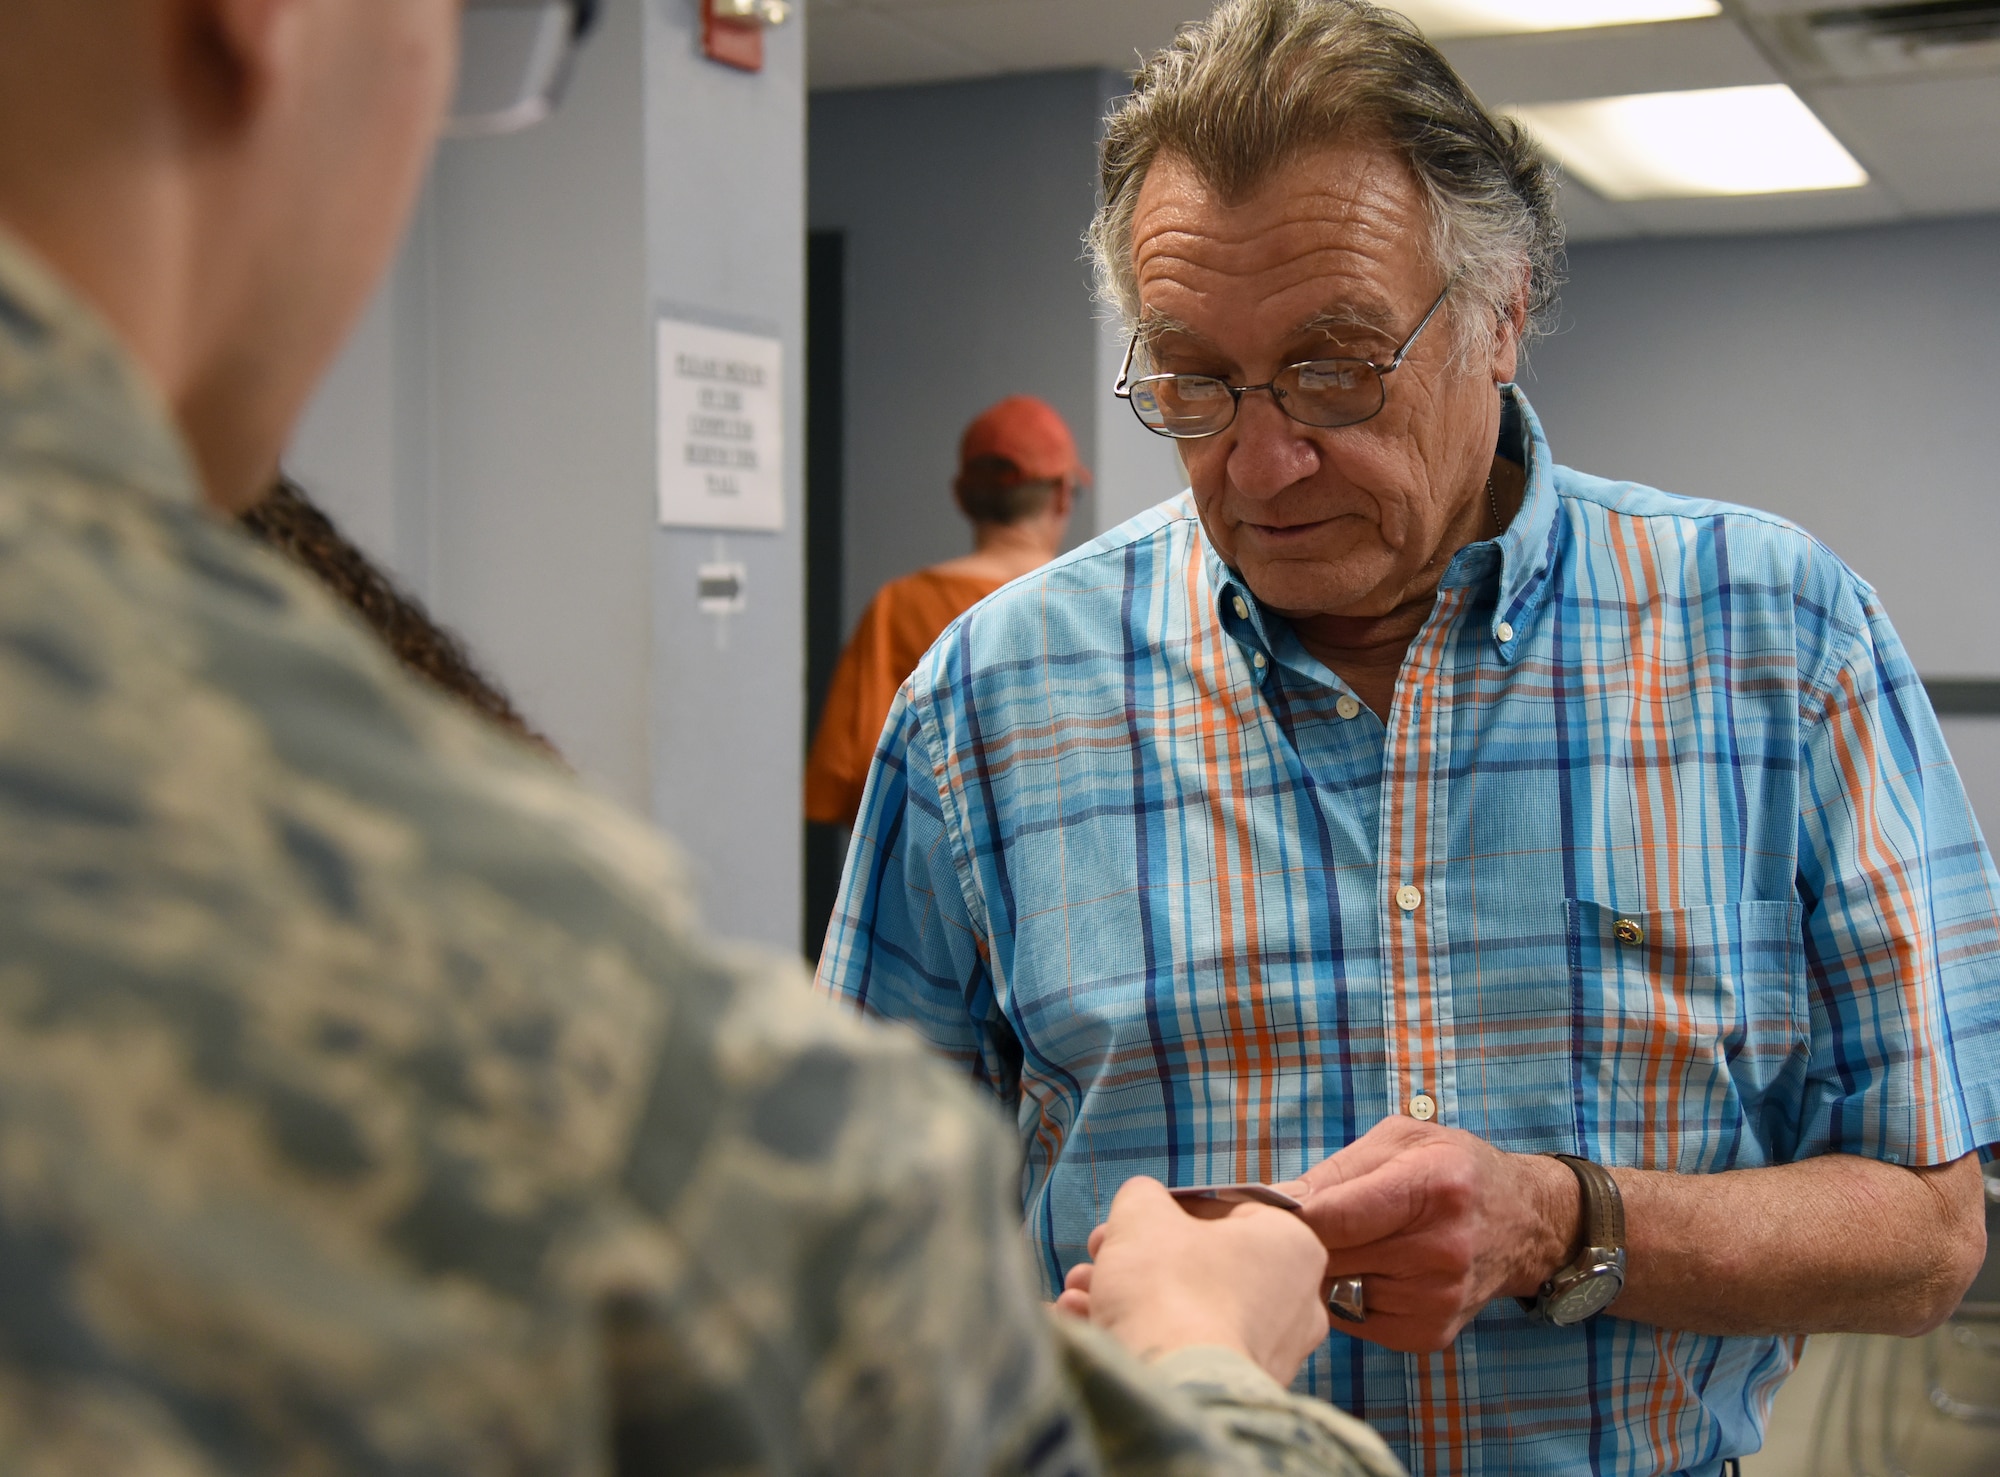 U.S. Air Force Senior Airman Shayne Hopkins, 81st Security Forces Squadron visitor control center clerk, presents Ashton Belcher, brother of Maj. Robert Belcher, with his Gold Star Family Member ID card inside the Visitors Center at Keesler Air Force Base, Mississippi, April 26, 2019. Robert was an F-4 pilot who served during the Vietnam War and was placed in POW/MIA status following his disappearance while on a mission to mark targets in 1969. As a surviving brother of a POW/MIA service member, Ashton is allowed to obtain a Gold Star Family Member ID card for recognition and installation access so that he can attend events and access Airman & Family Readiness Center referral services. (U.S. Air Force photo by Kemberly Groue)